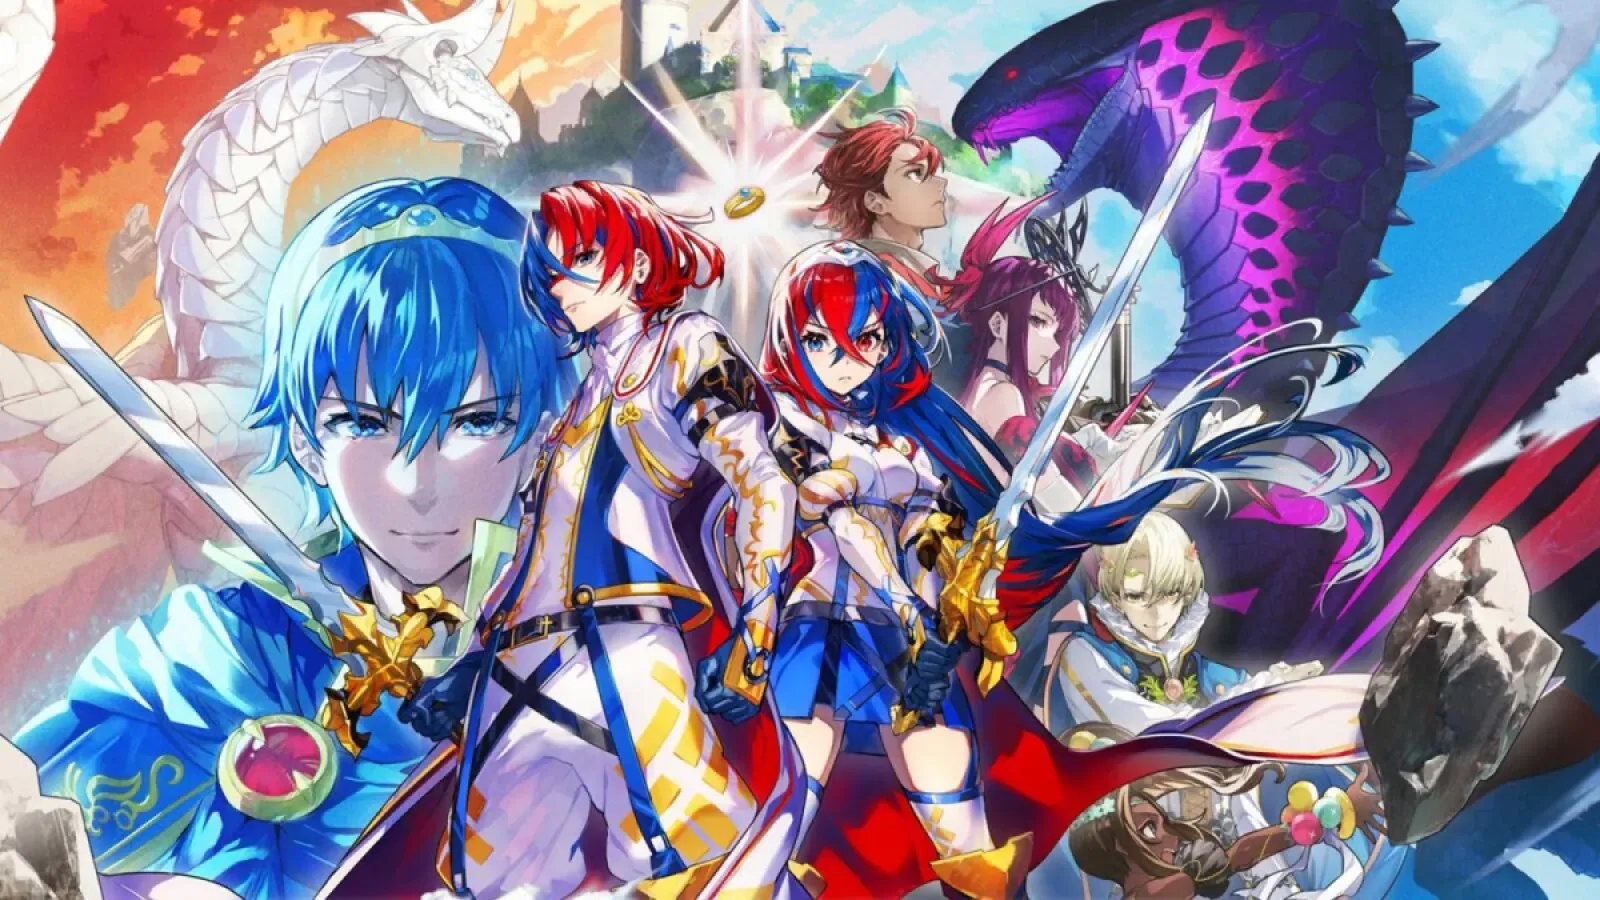 Official game art for Nintendo's Fire Emblem Engage featuring characters from the video game